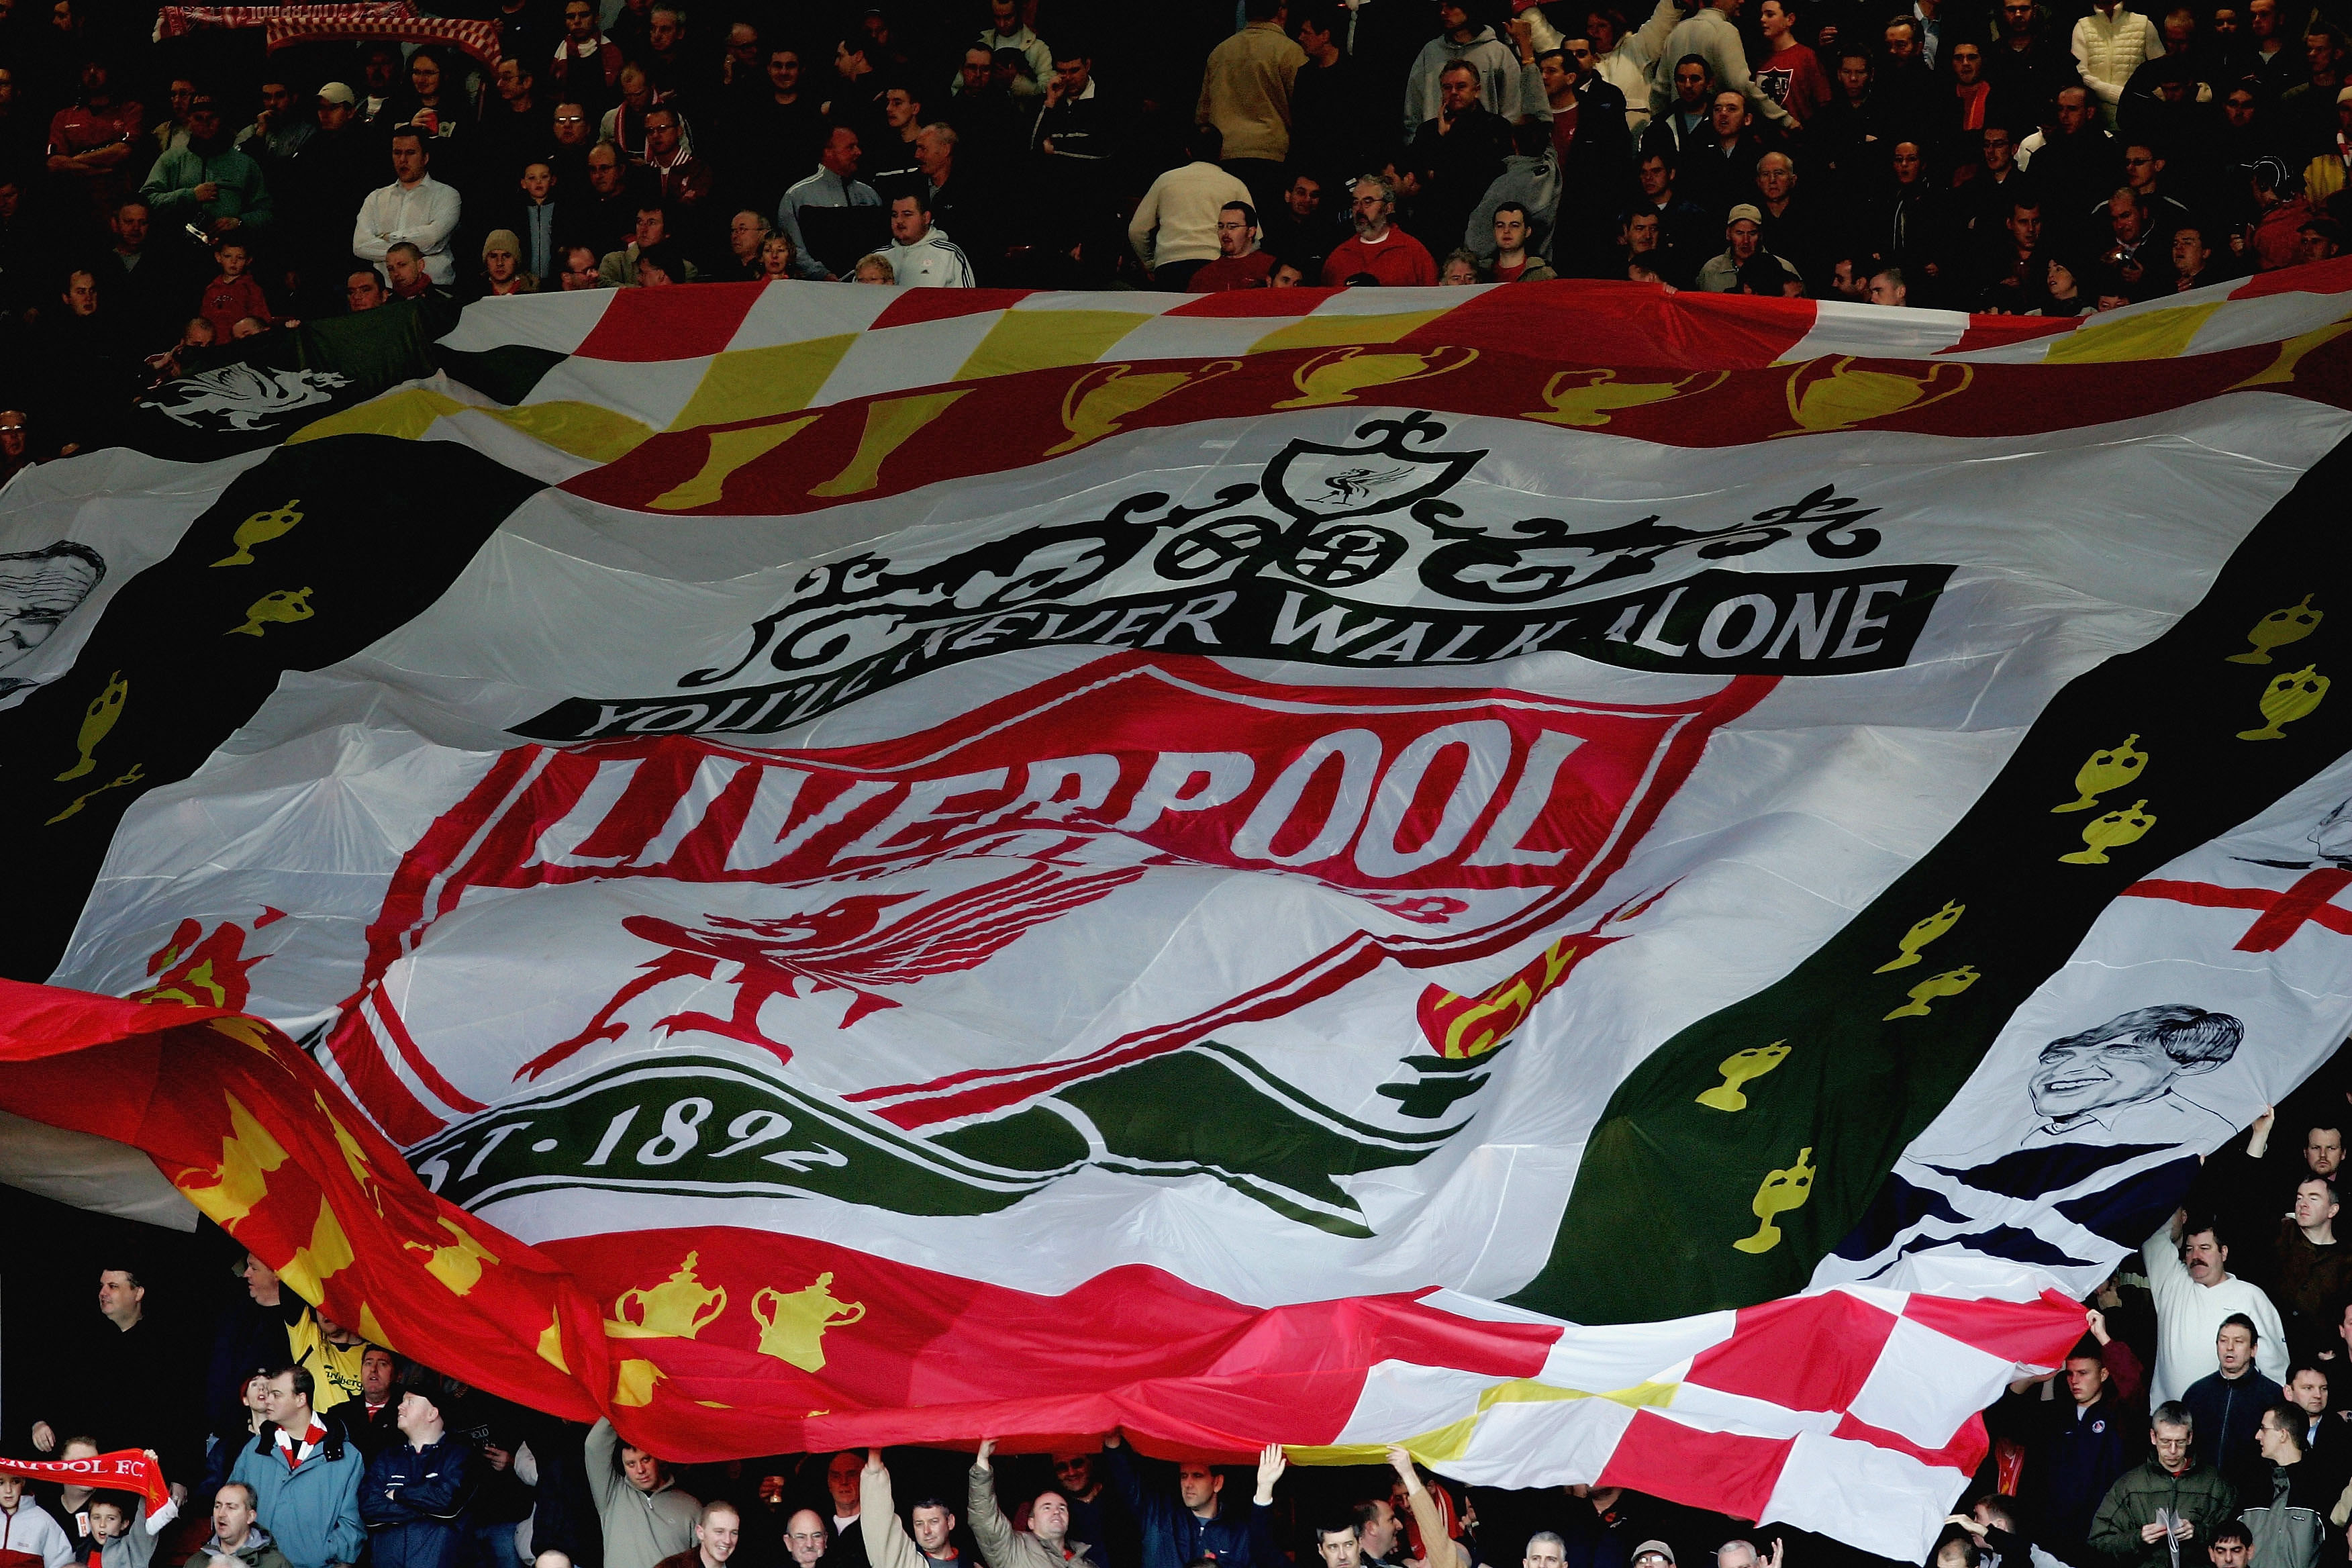 LIVERPOOL, ENGLAND - NOVEMBER 13:  A giant Liverpool flag above the crowd in the Kop Eng of Anfield before the Barclays Premiership match between Liverpool and Crystal Palace at Anfield, on November 13, 2004 in Liverpool, England.  (Photo by Ross Kinnaird